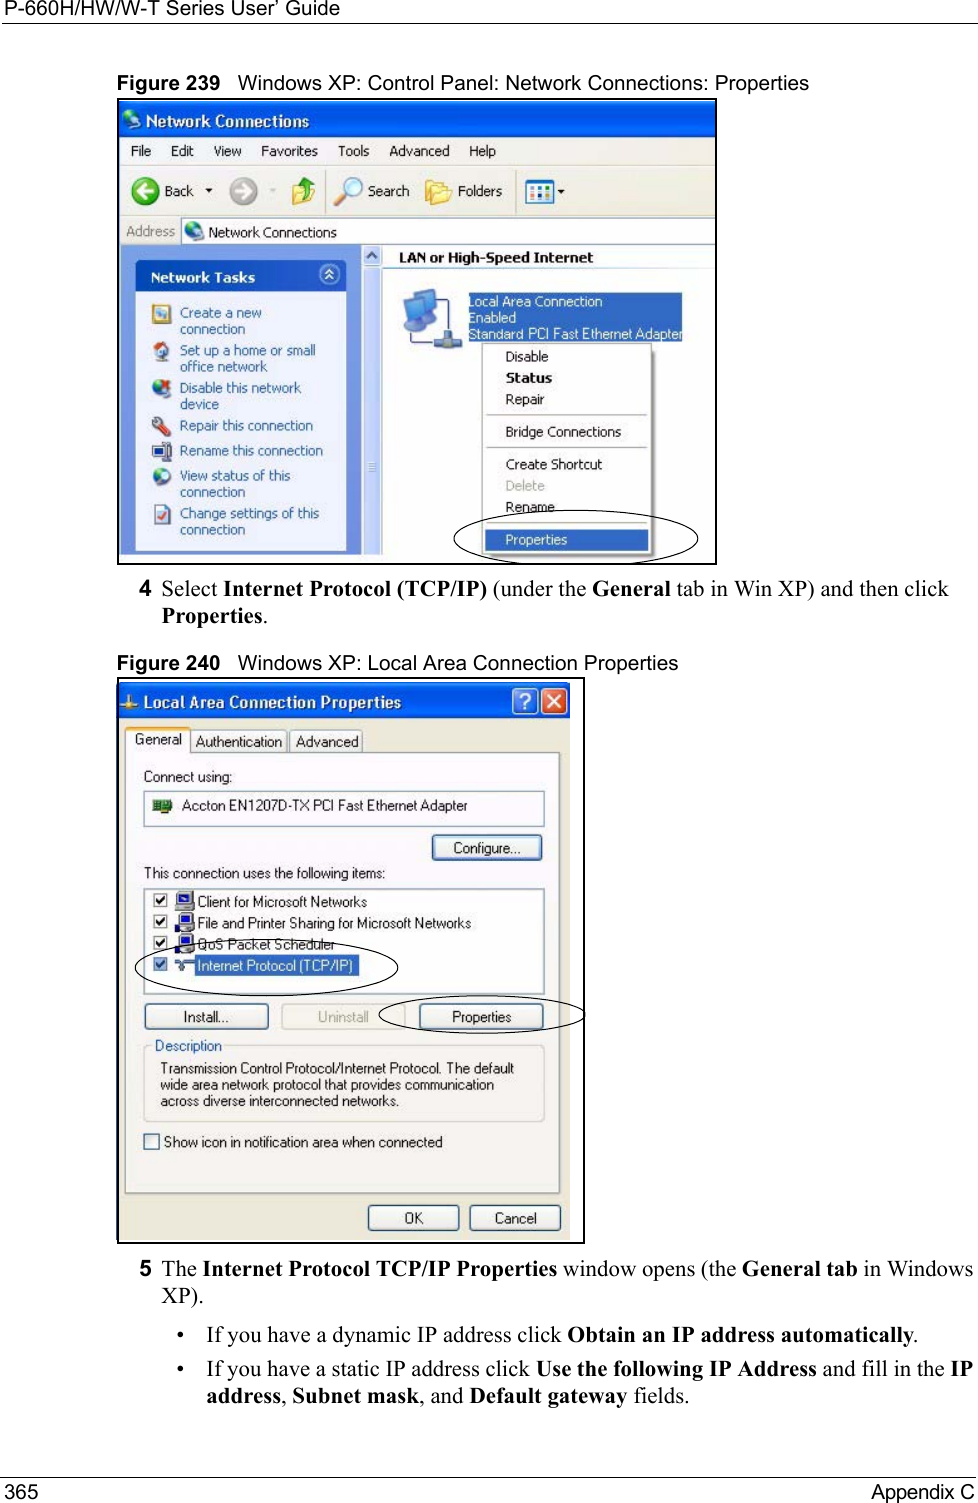 P-660H/HW/W-T Series User’ Guide365 Appendix CFigure 239   Windows XP: Control Panel: Network Connections: Properties4Select Internet Protocol (TCP/IP) (under the General tab in Win XP) and then click Properties.Figure 240   Windows XP: Local Area Connection Properties5The Internet Protocol TCP/IP Properties window opens (the General tab in Windows XP).• If you have a dynamic IP address click Obtain an IP address automatically.• If you have a static IP address click Use the following IP Address and fill in the IP address, Subnet mask, and Default gateway fields. 